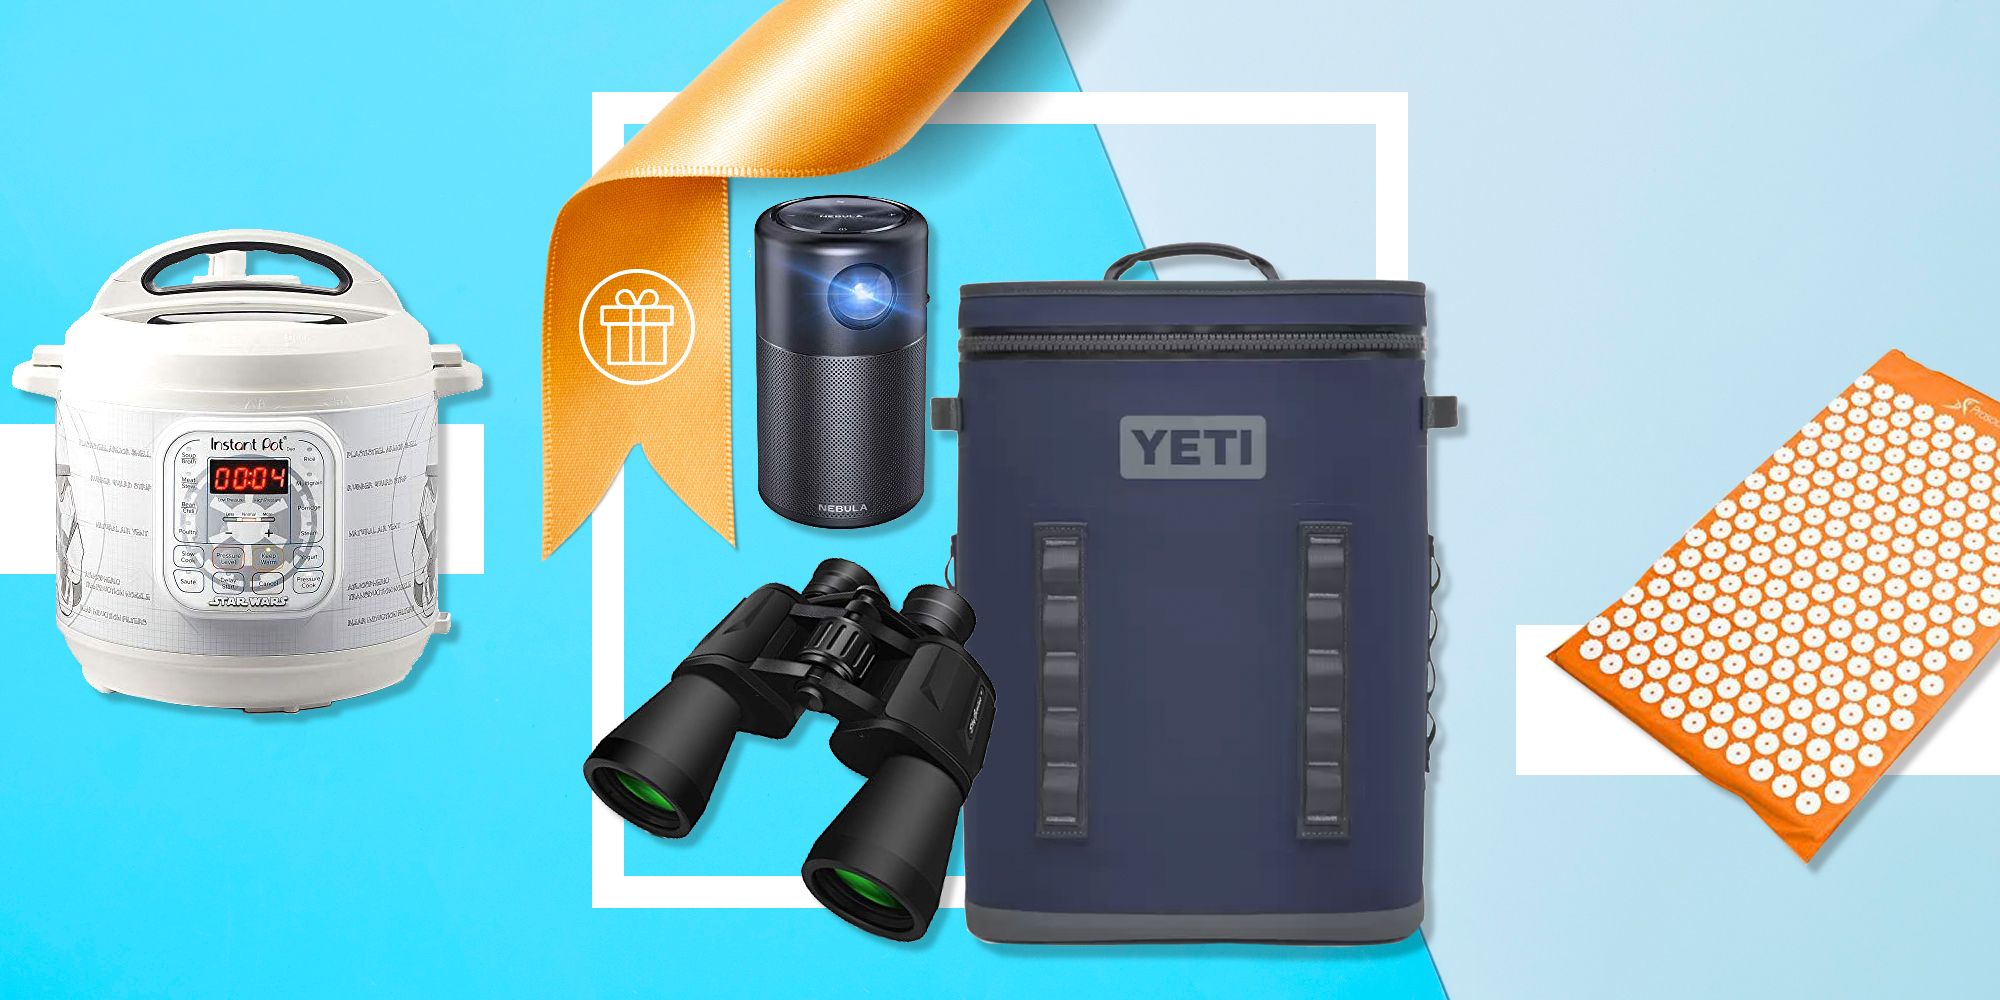 12 Yeti Gifts That Are Perfect for Anyone on Your List - InsideHook